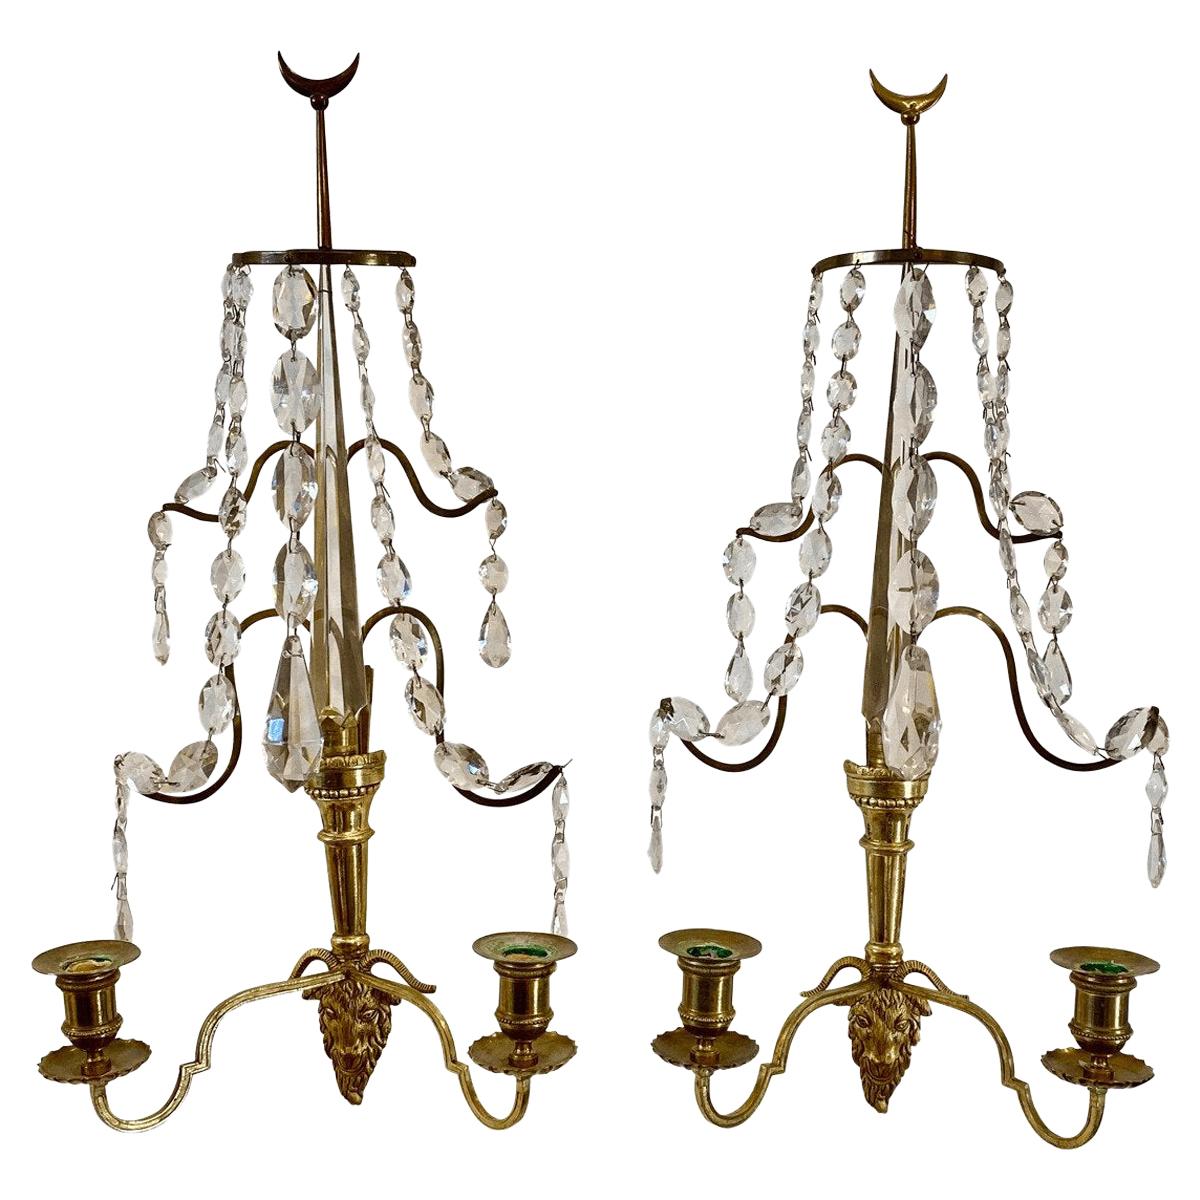 Pair of Baltic or Russian Fire Gilt Bronze Two-Arm Wall Sconces, circa 1810